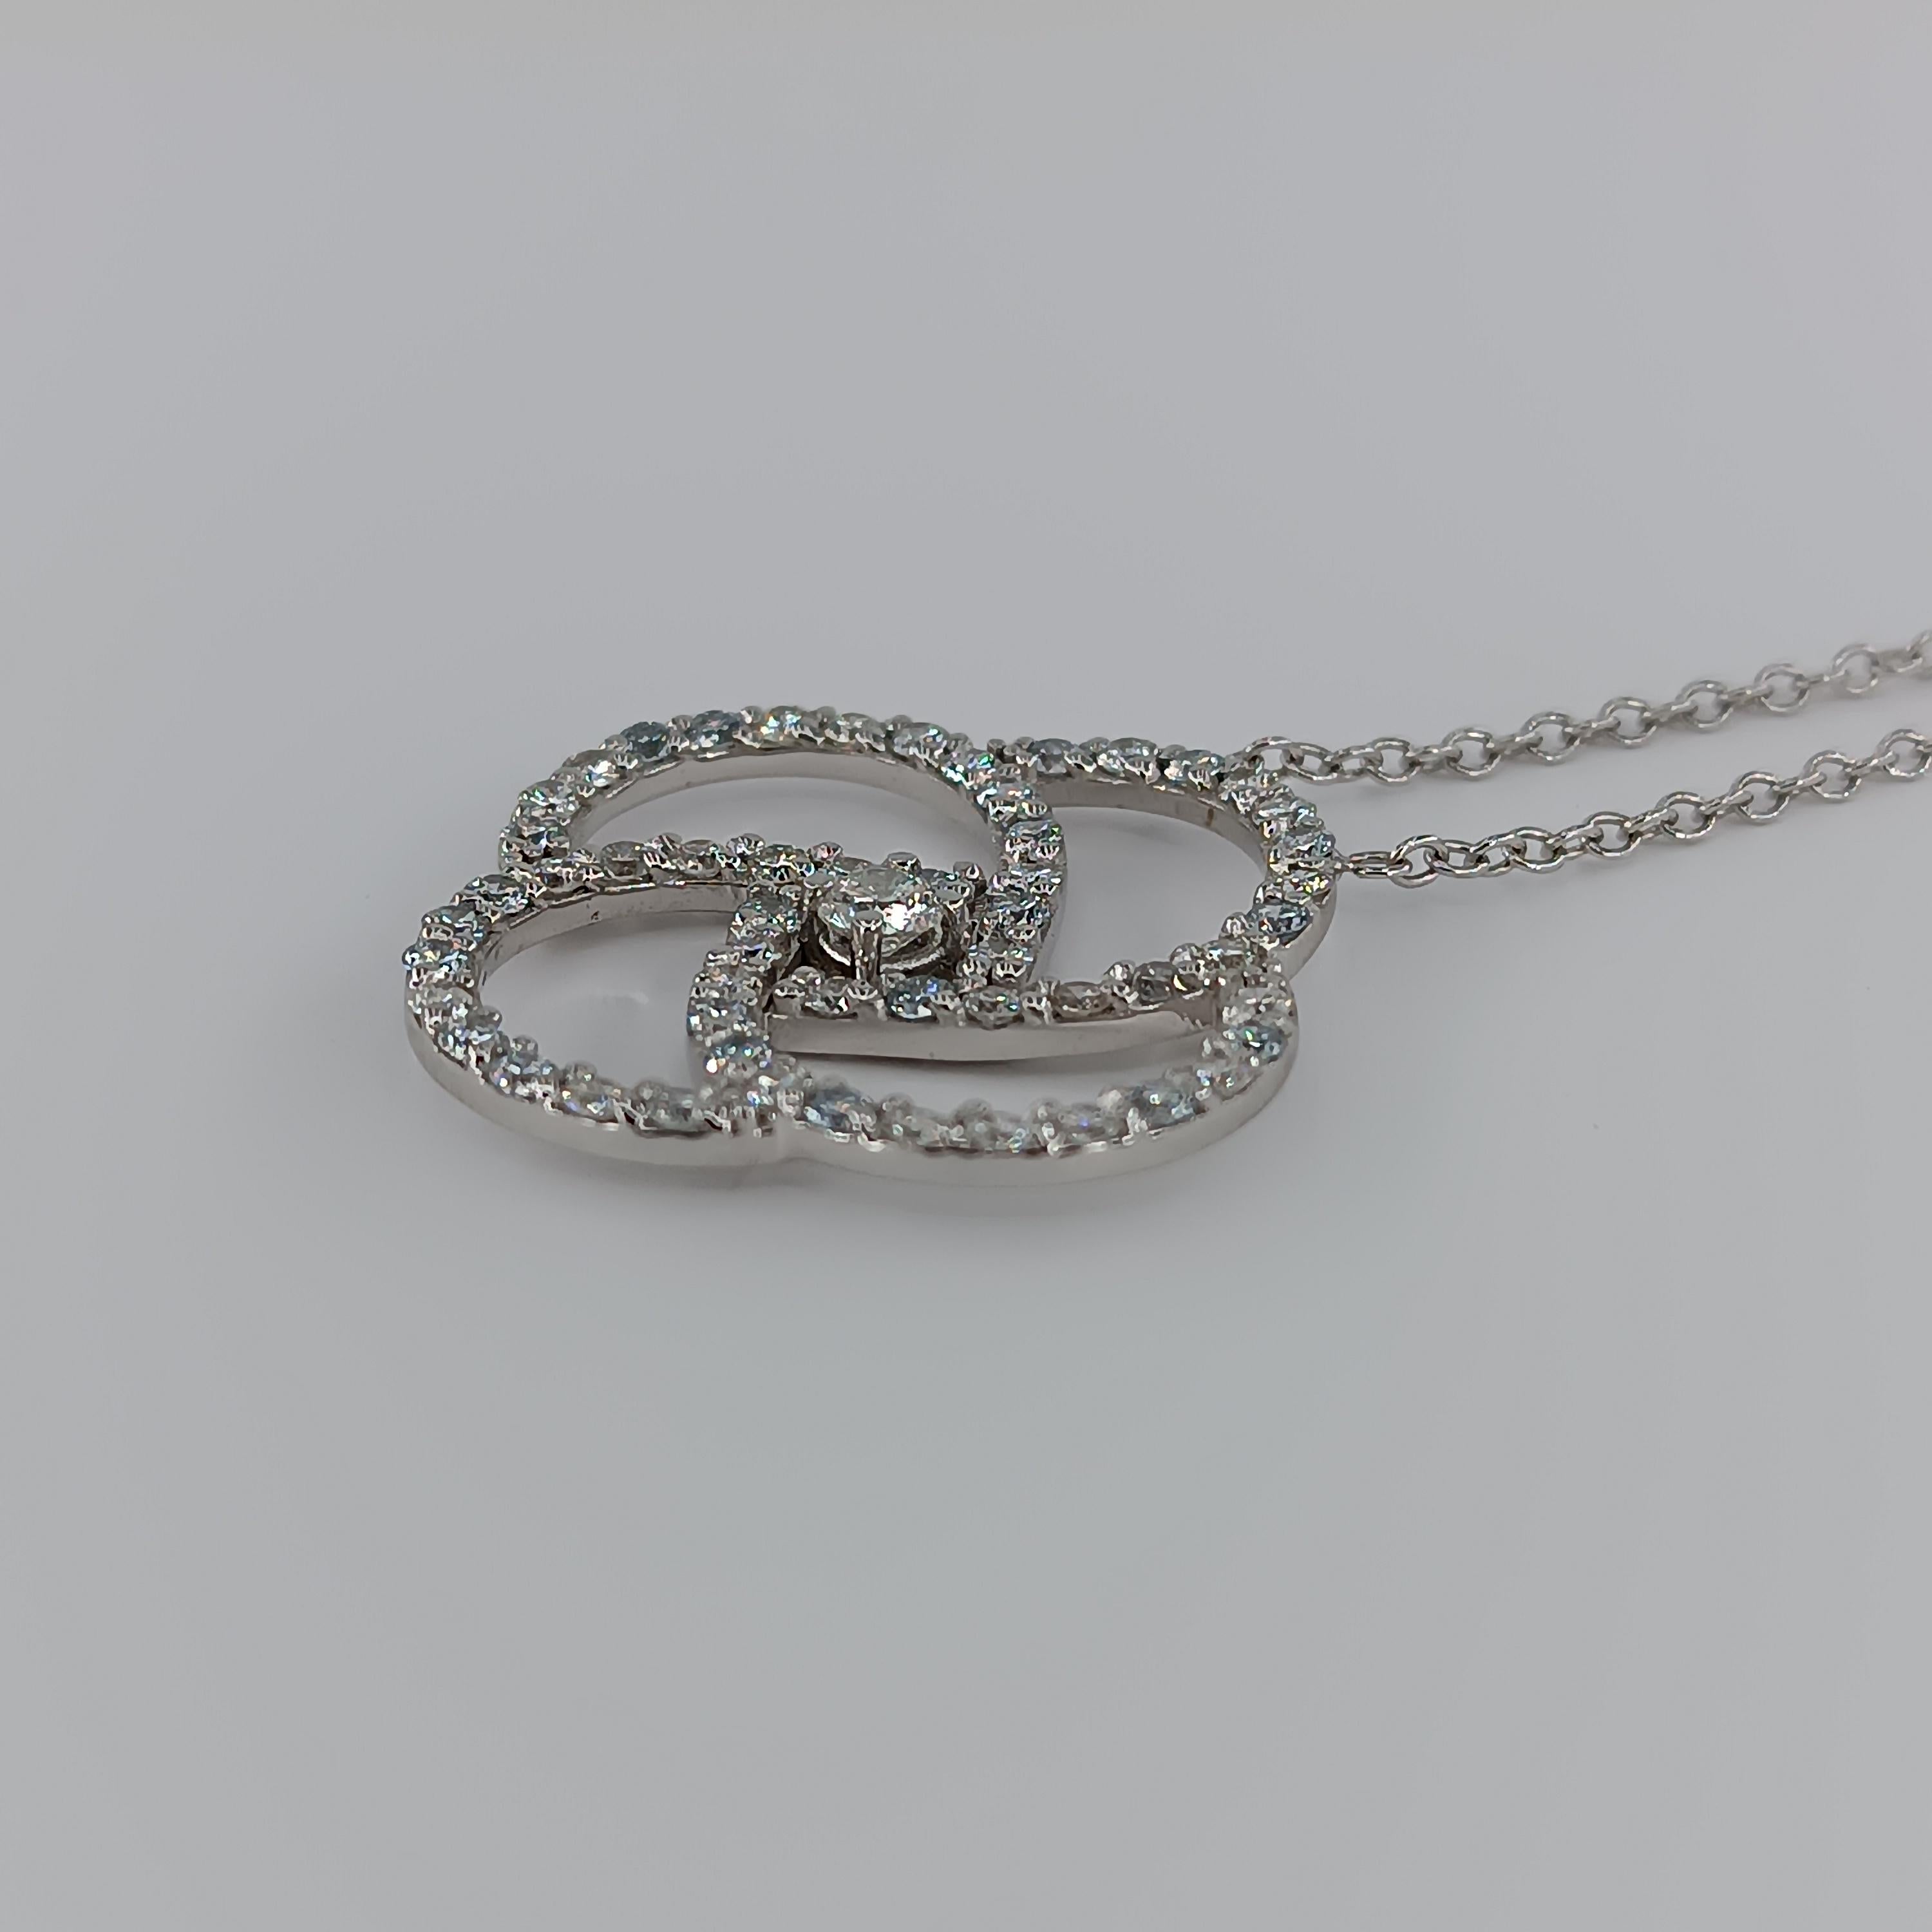 This beautiful pendant made of 18 carat White gold for 9.77 grams boasts a central Diamond of 0.25 carat and 56 VS G color diamonds for a total of 1.93 carats. 
any item of our jewelry collection has a dedicated identification number lasered on the